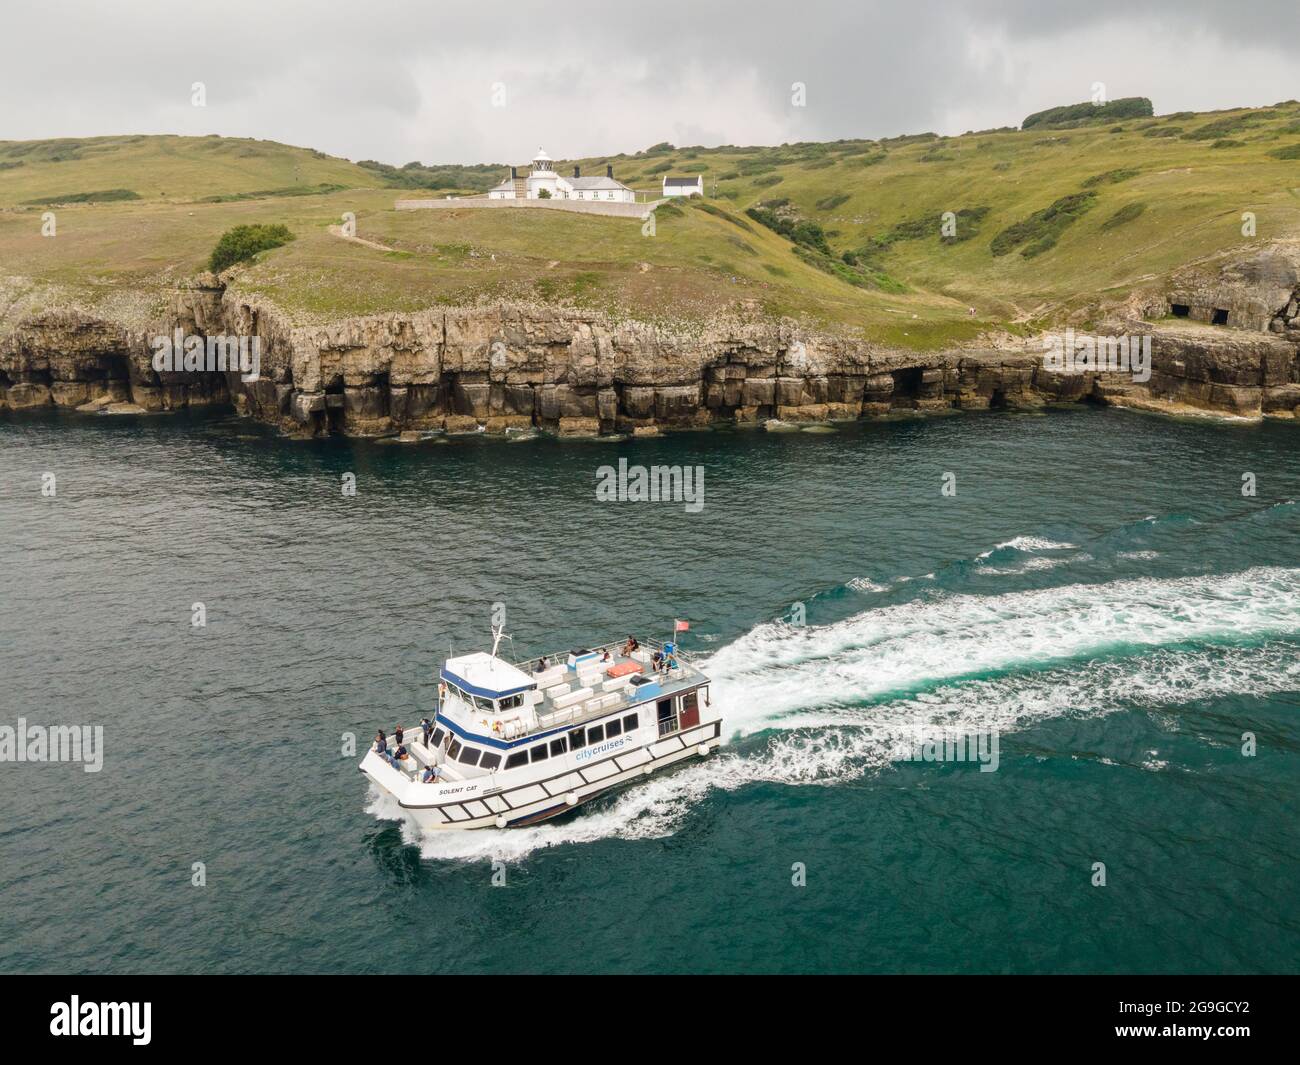 City Cruises from Poole- a tour boat experience along the Jurassic Coast in Dorset, South West England Stock Photo